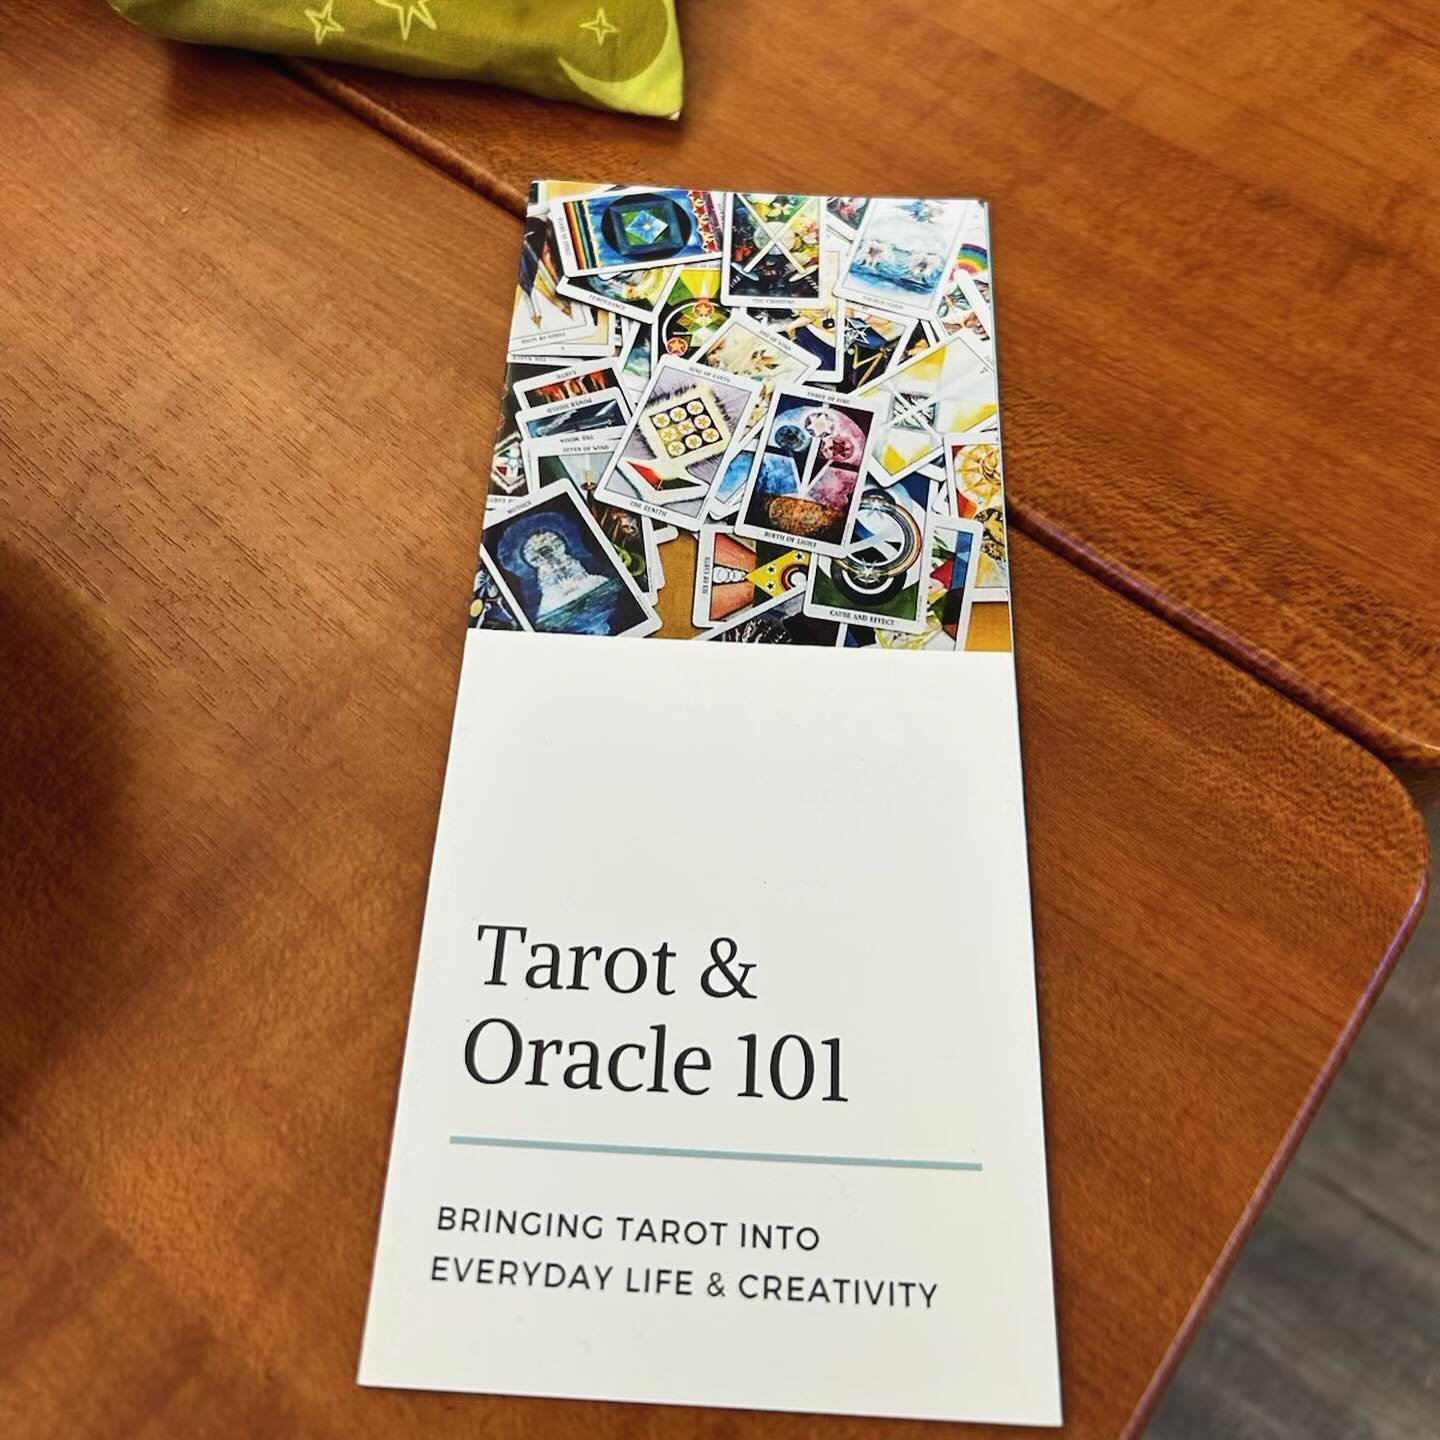 I had so much fun teaching my Tarot &amp; Oracle 101 class for the @westsoundacademy auction yesterday. I love introducing this visual tool for transformation, contemplation, and creativity.

The class was filled with newcomers to tarot and some who 